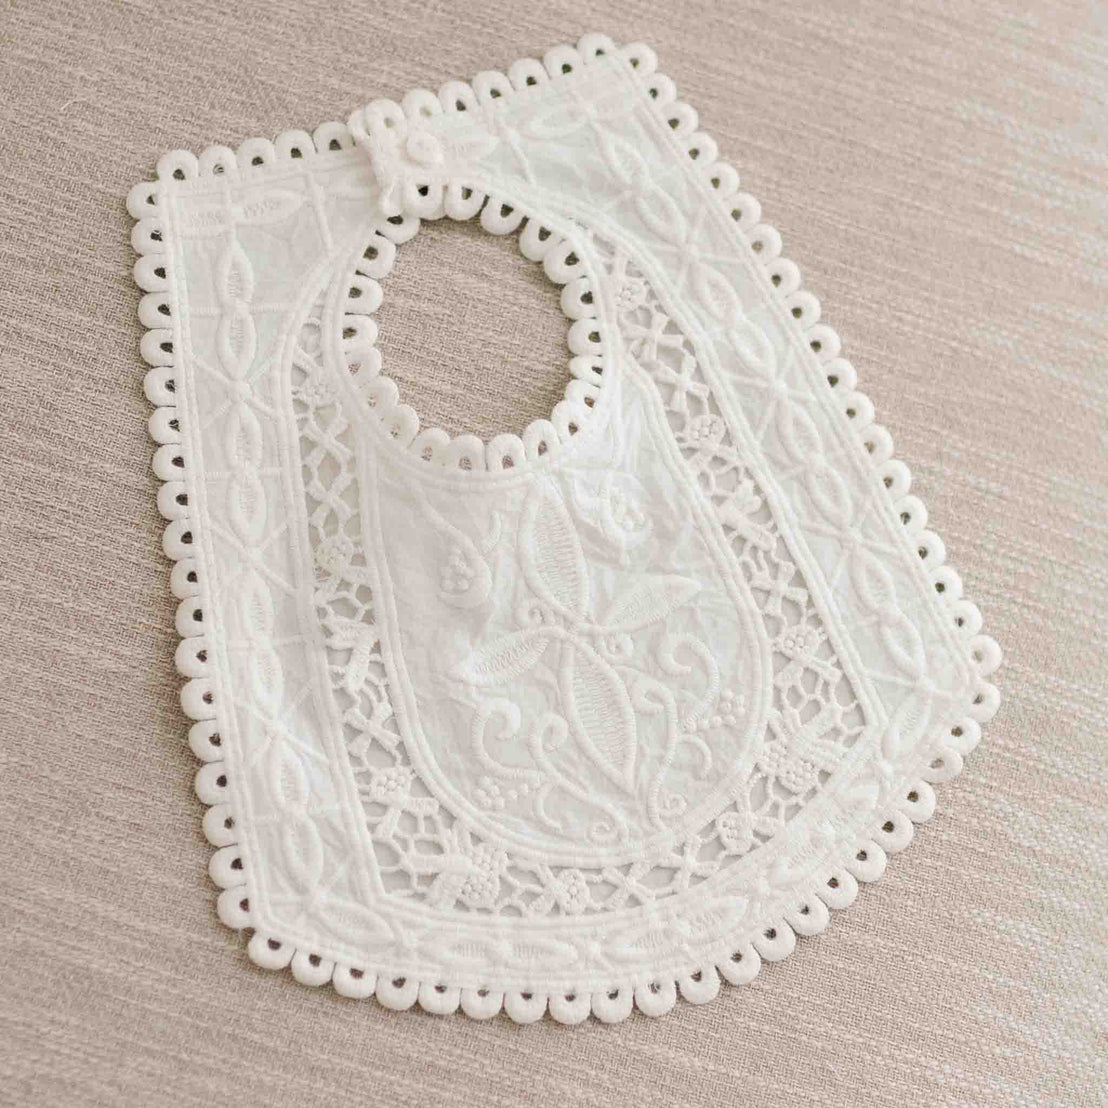 Flat lay photo of the Lily Lace Bib that is made out of cotton lace in light ivory and exhibits a unique squared design and circle lace trim